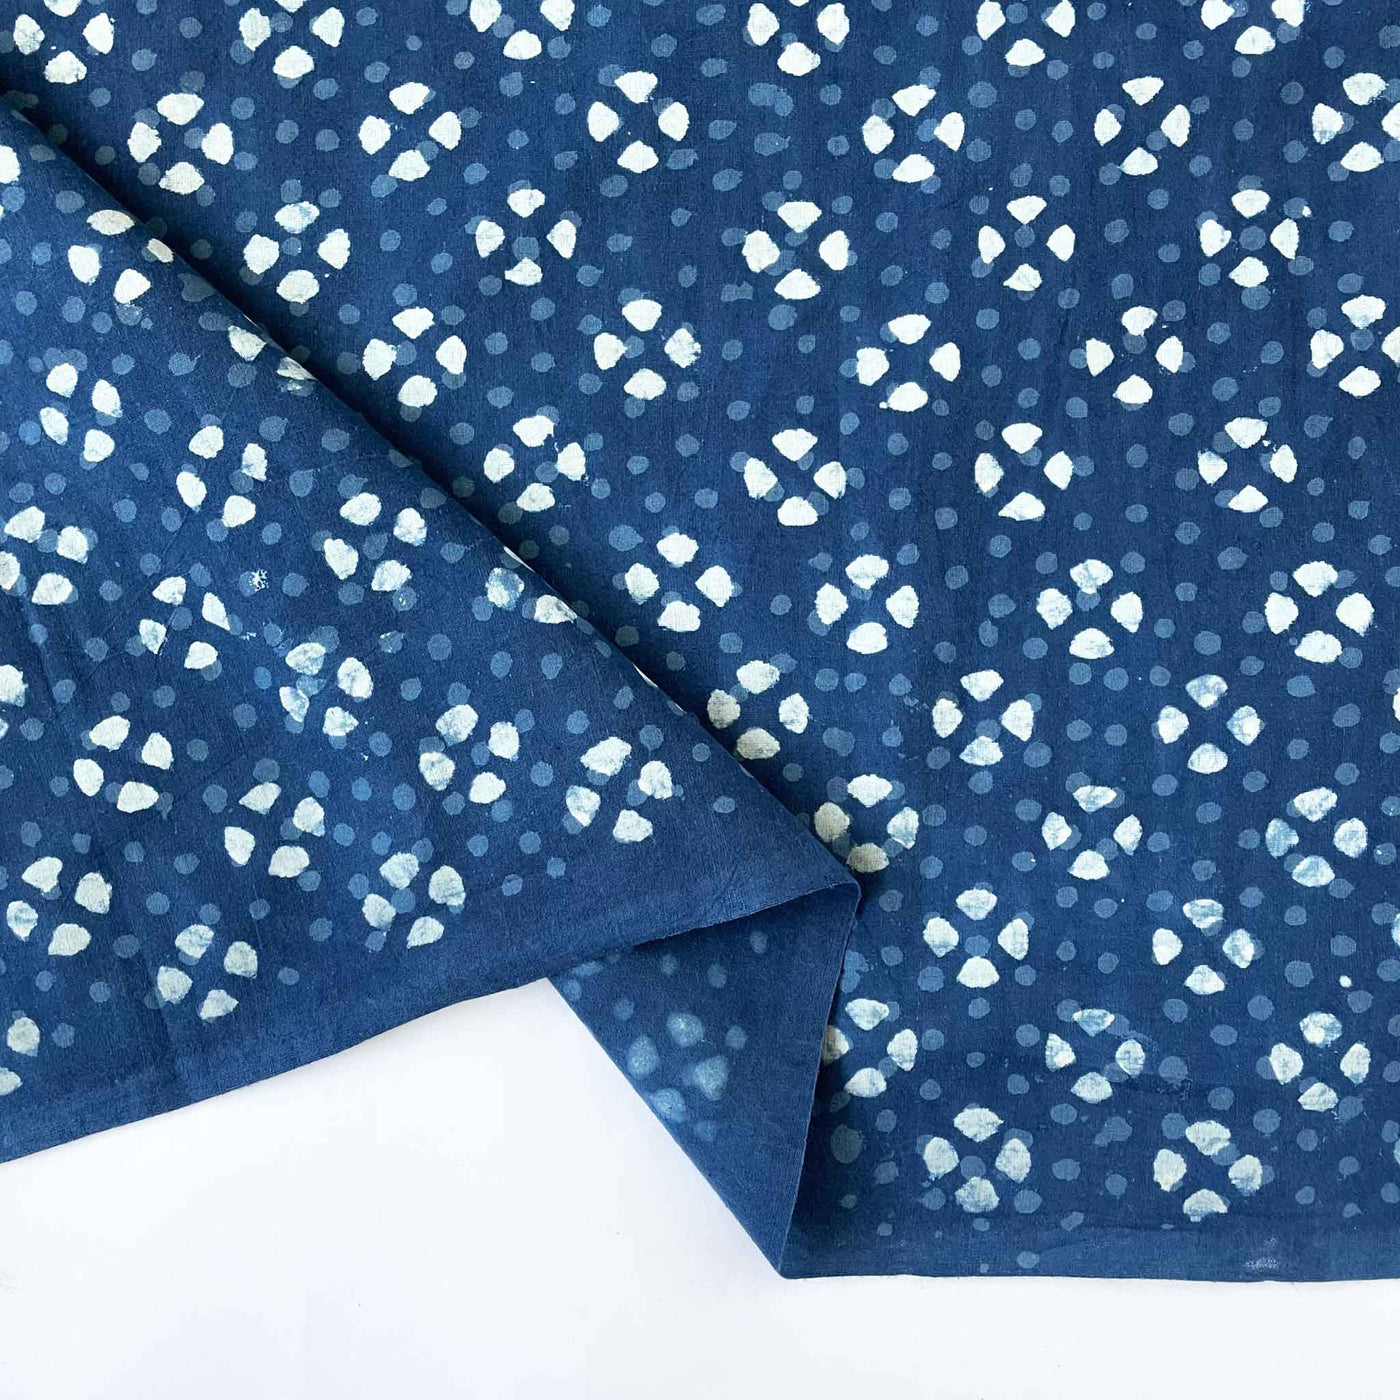 Fabric Pandit Fabric Indigo Dabu Natural Dyed Abstract floral Dots Hand Block Printed Pure Cotton Fabric (Width 43 inches)